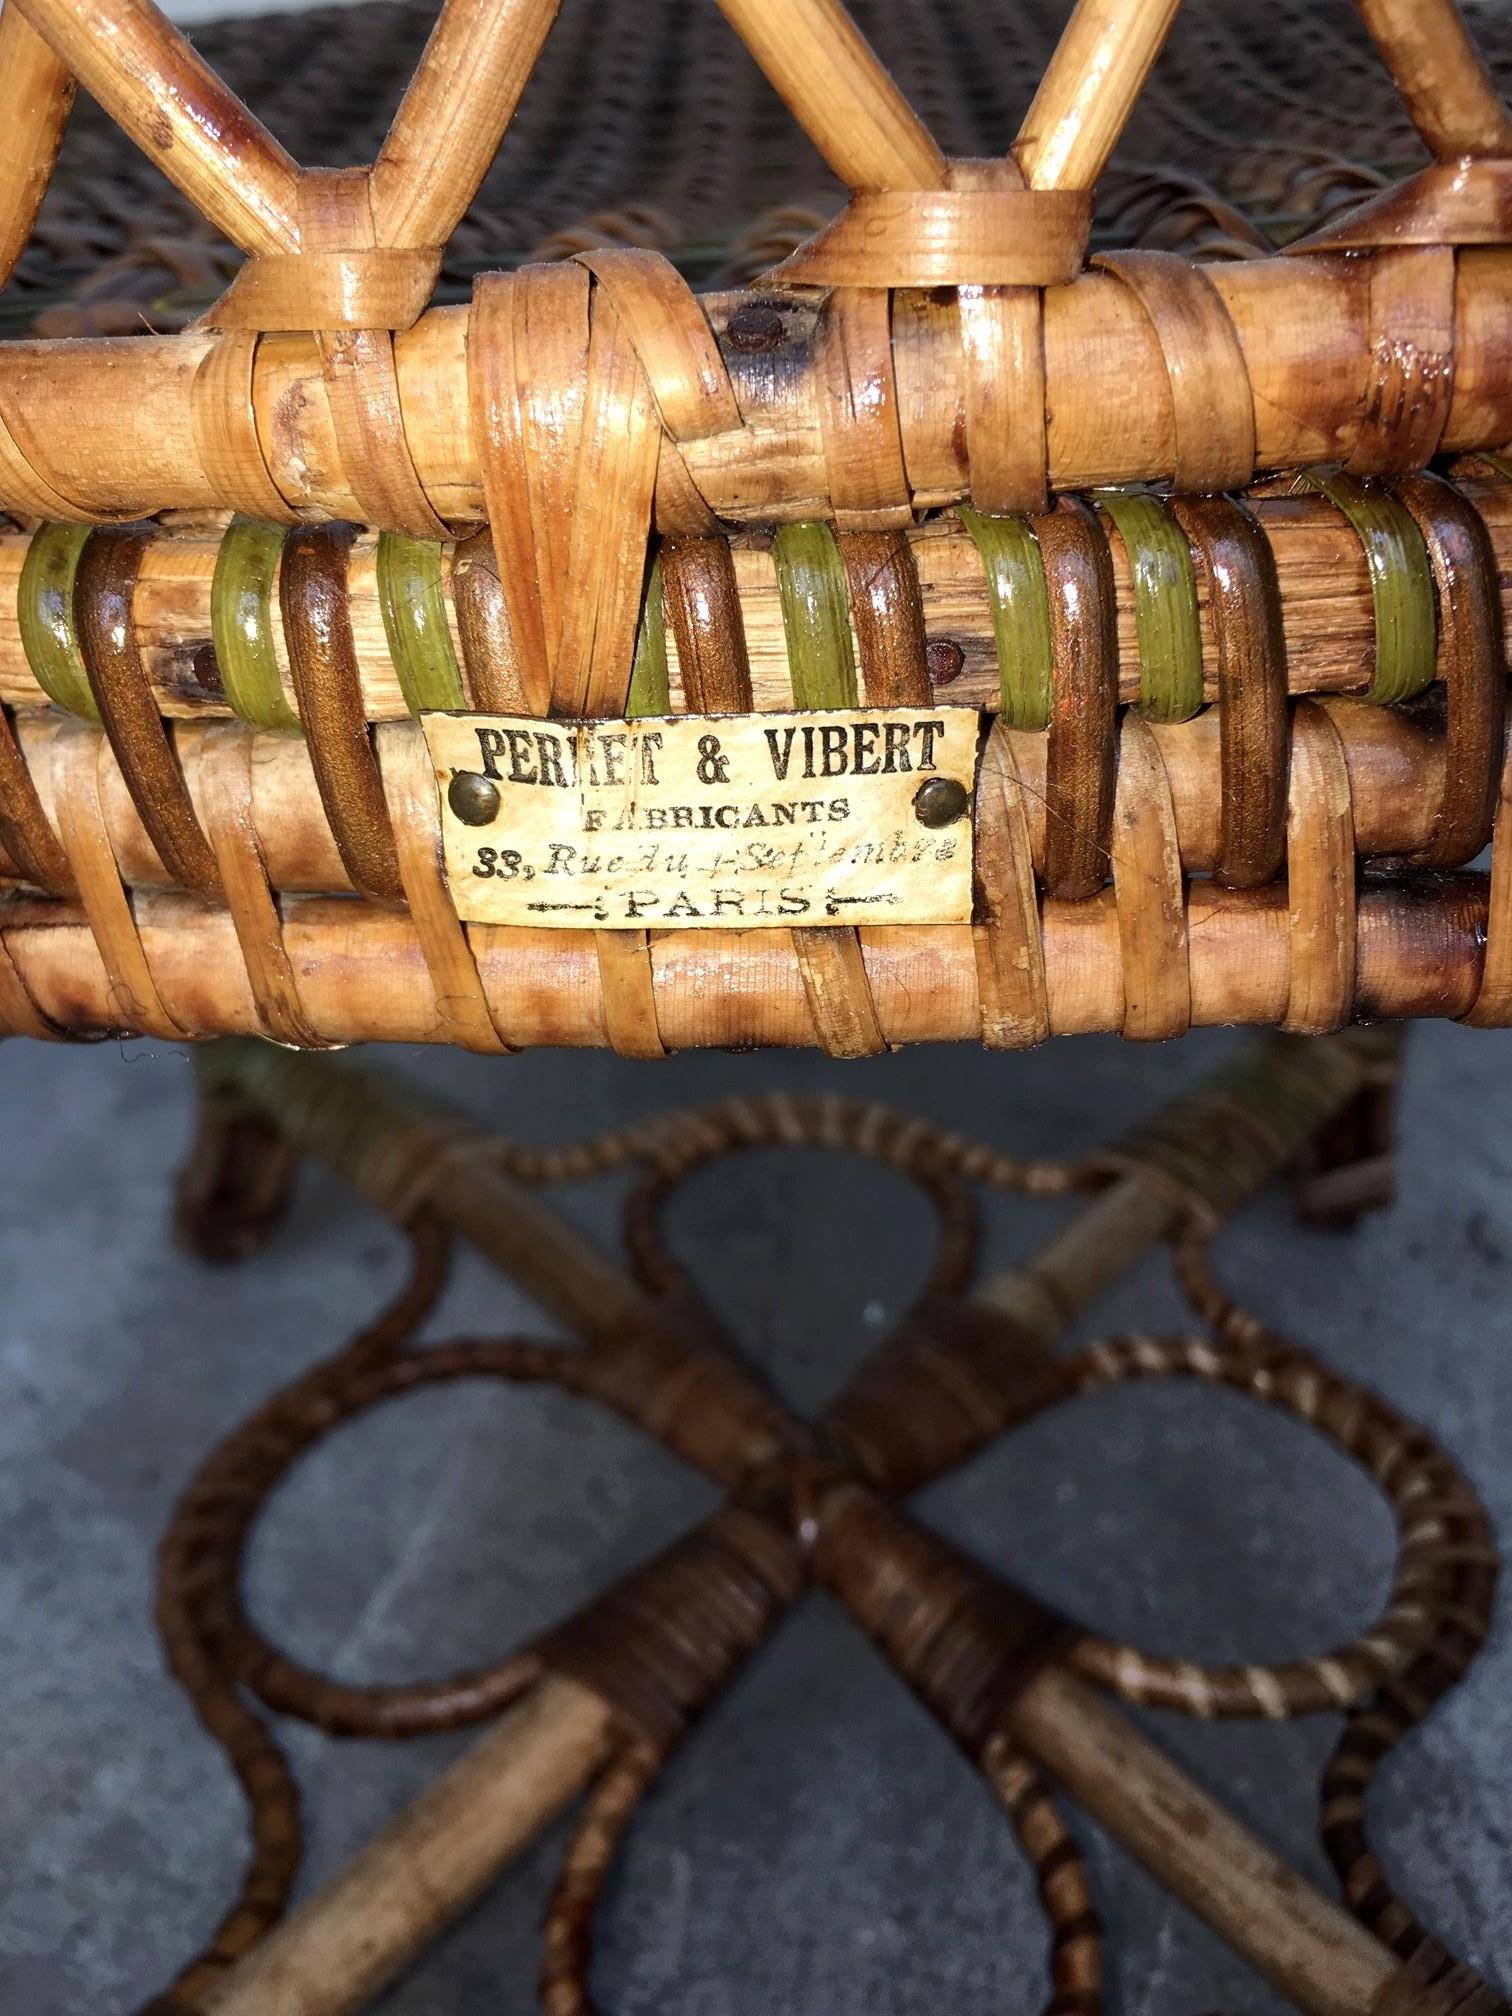 Rattan Garden Furniture Set by Maison Perret Vibert, Second Half of 19th Century For Sale 5